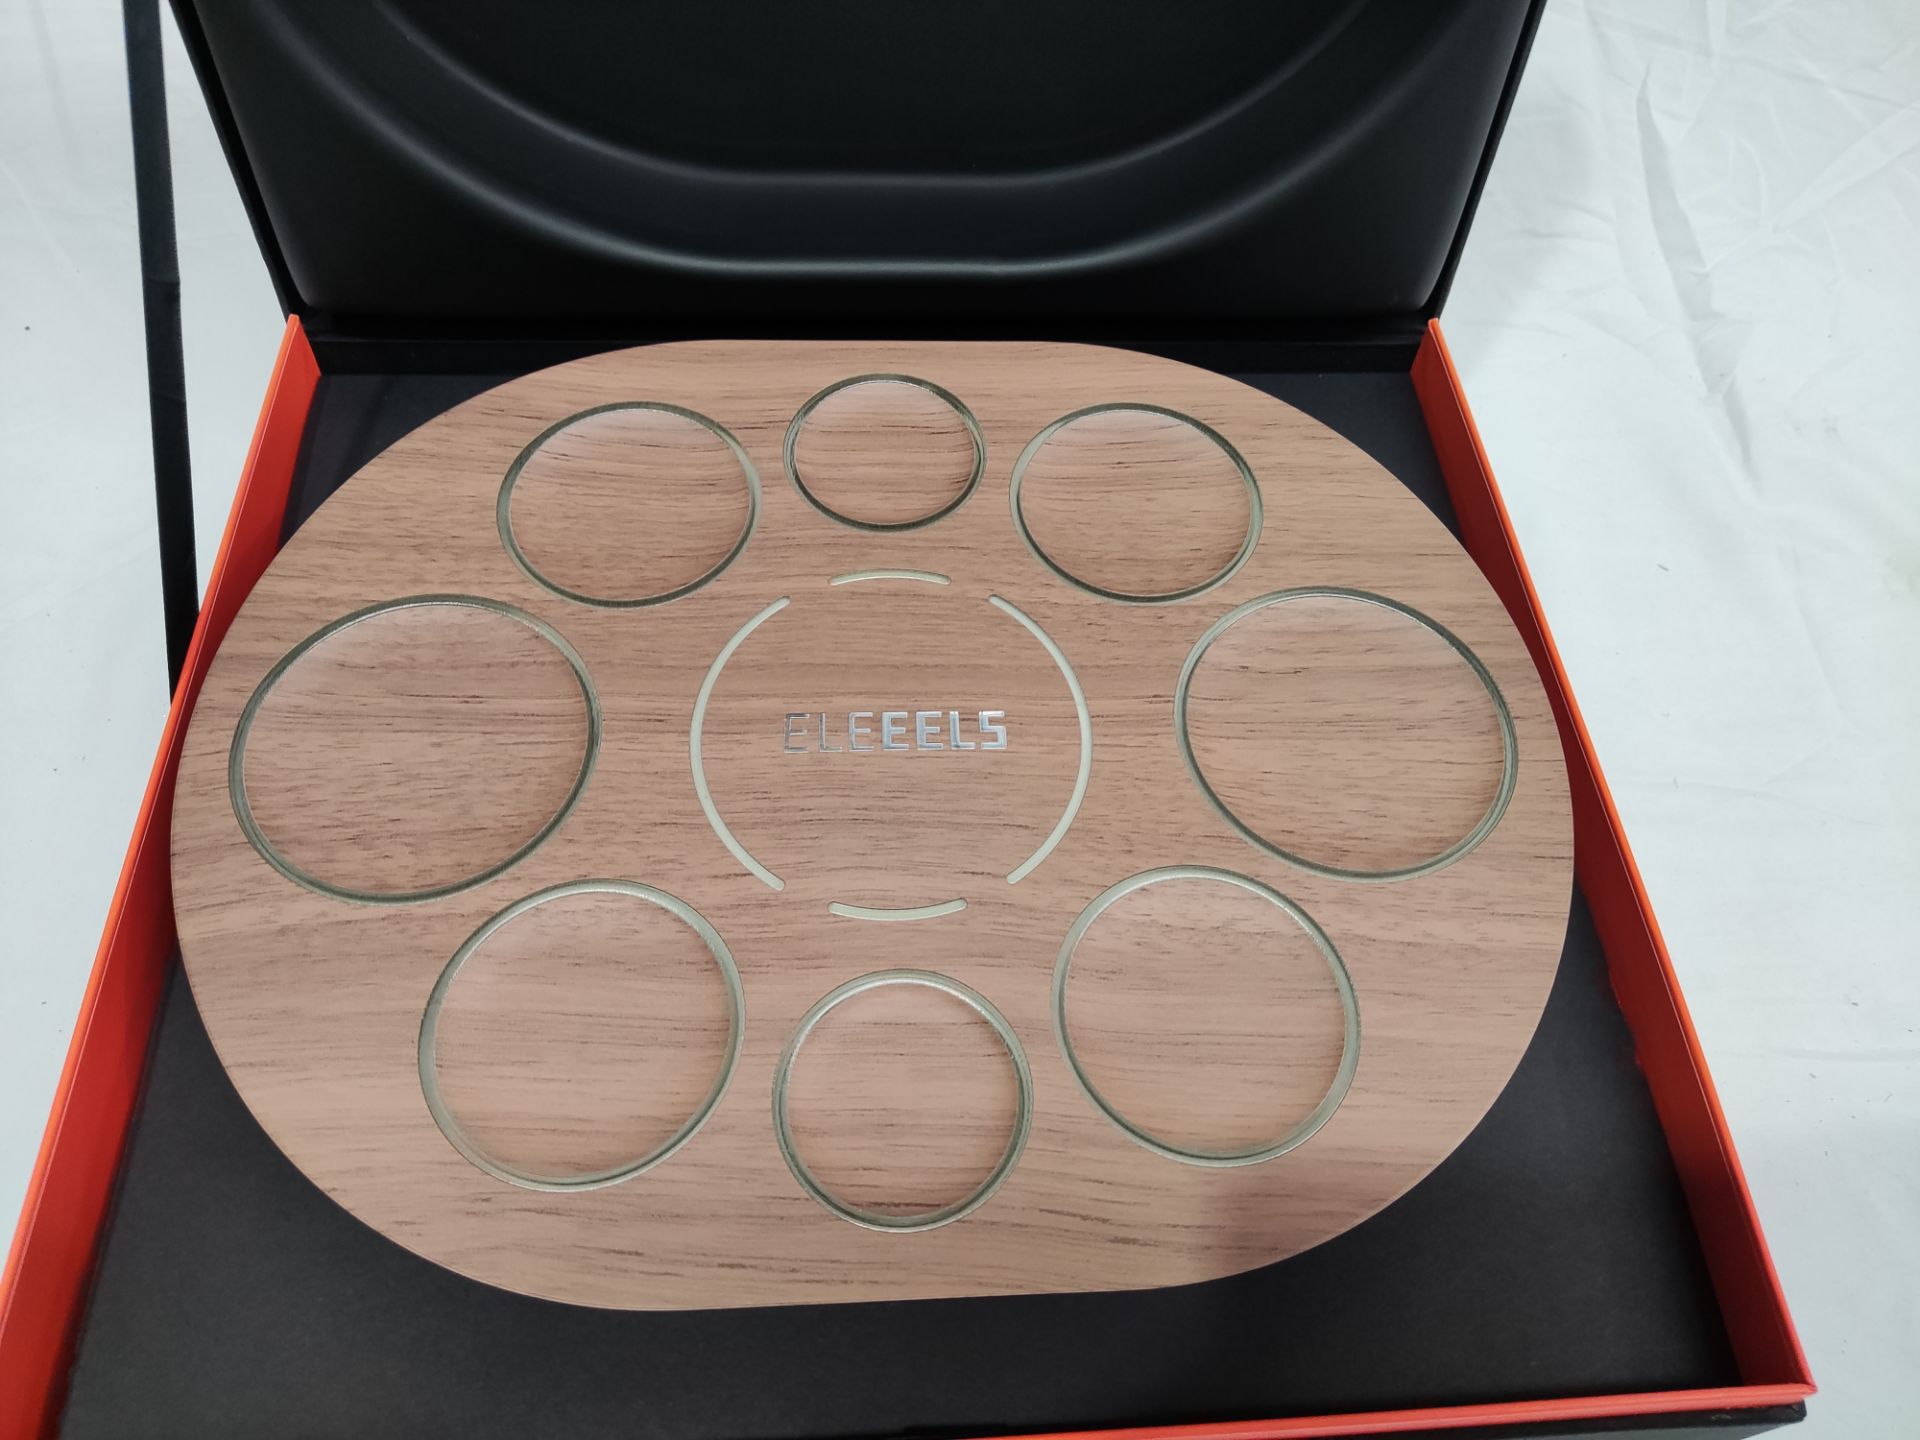 1 x ELEEELS Eleeels S1 Revival Hot Stone Spa Collection - New/Boxed - Original RRP £349 - Ref: - Image 10 of 16